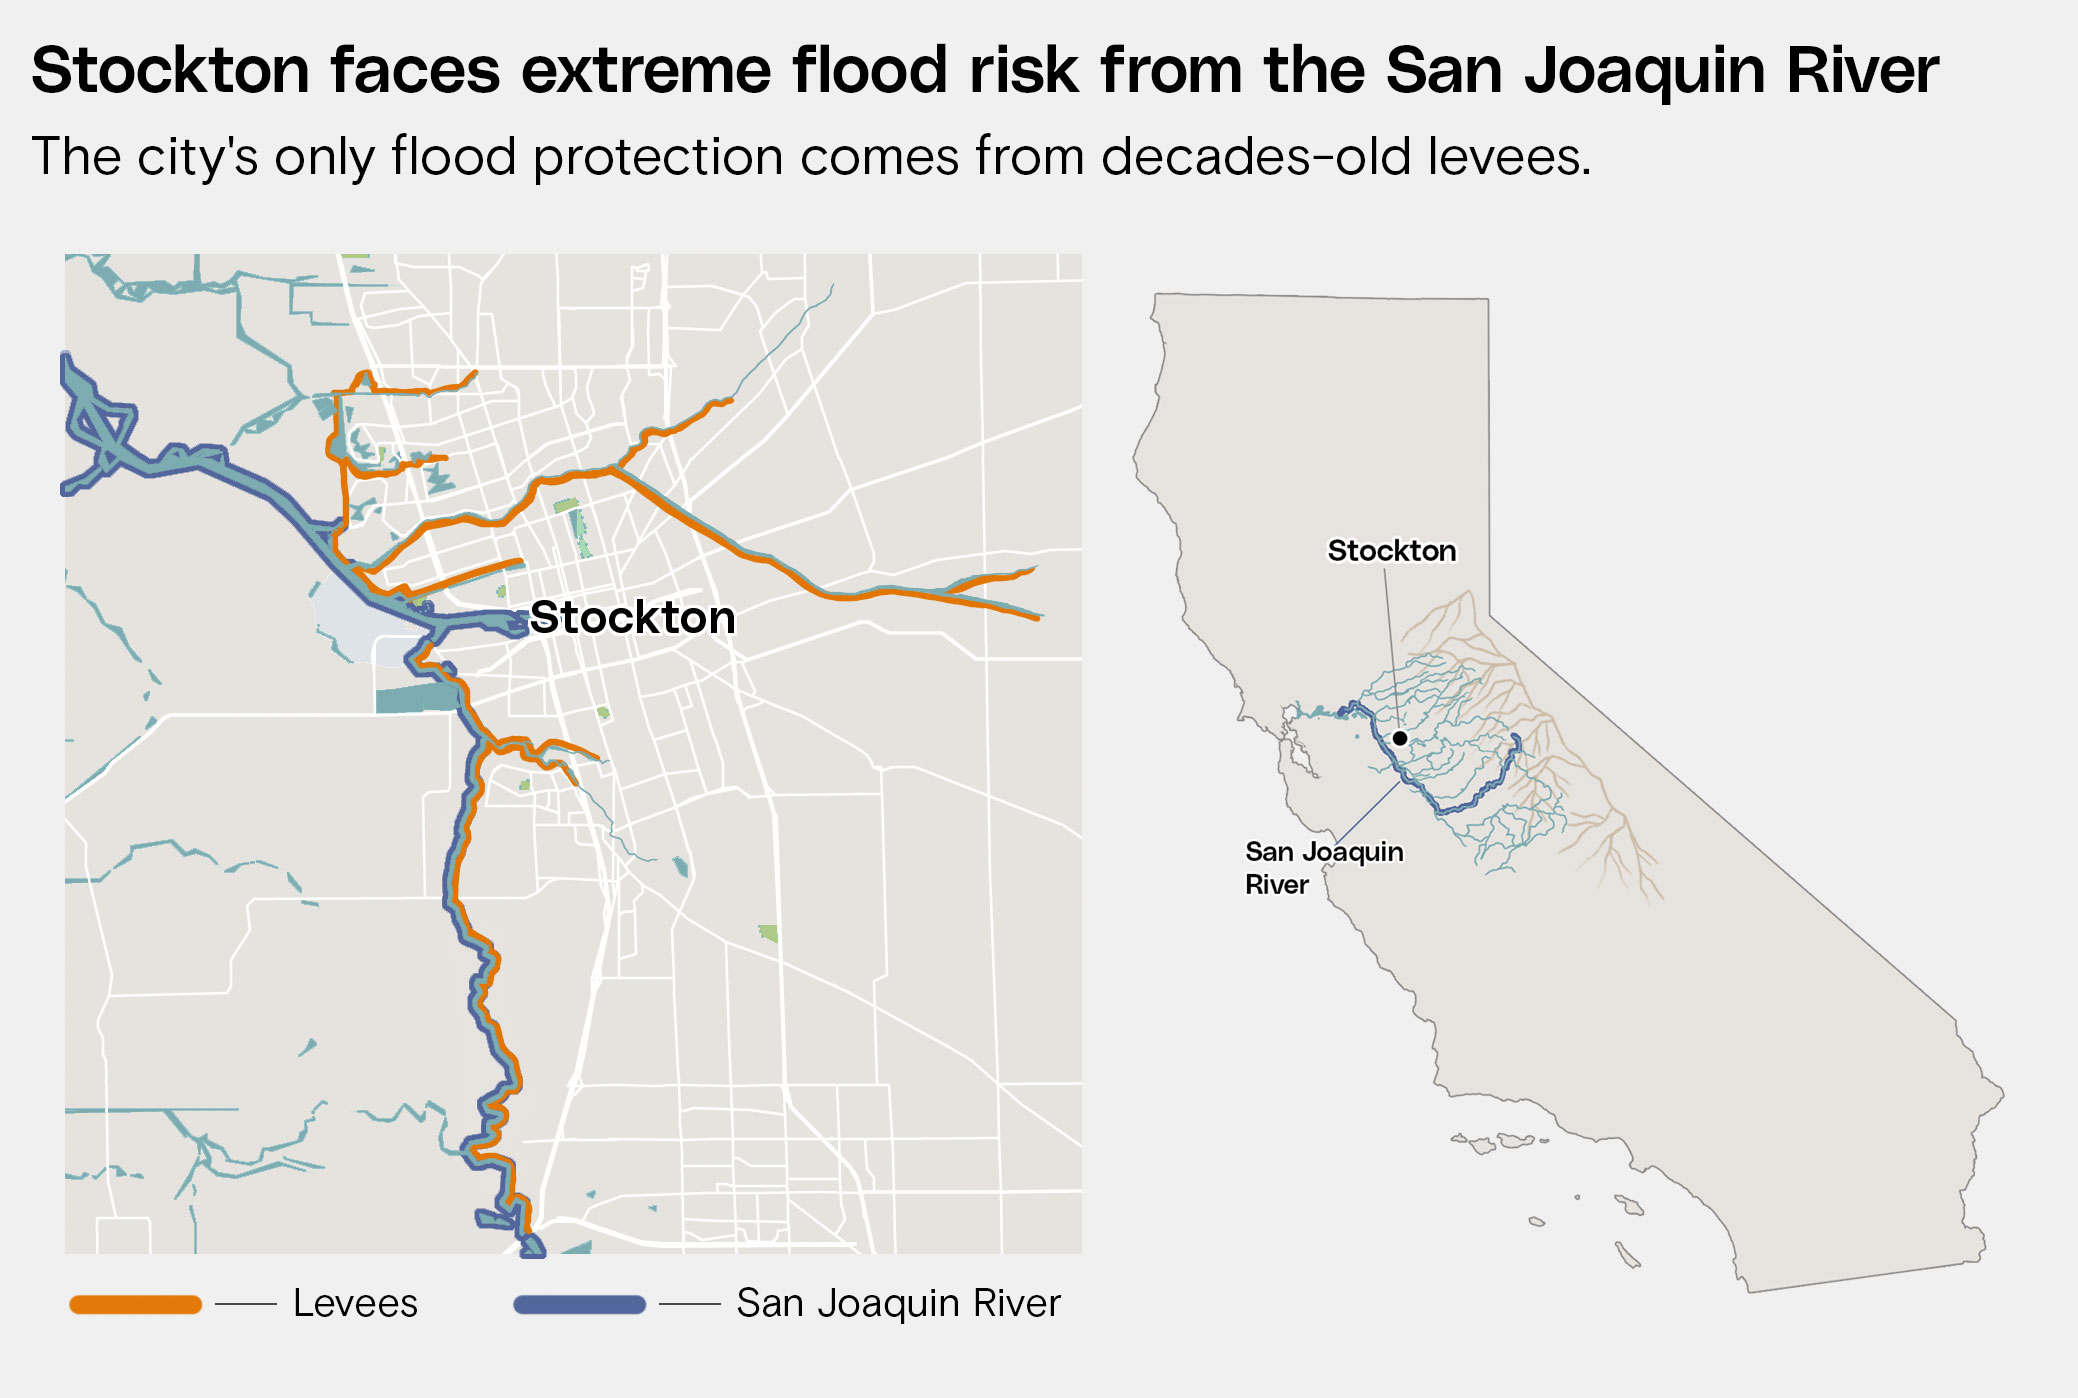 Technology News: California’s next flood could destroy one of its most diverse cities. Will lawmakers try to save it?